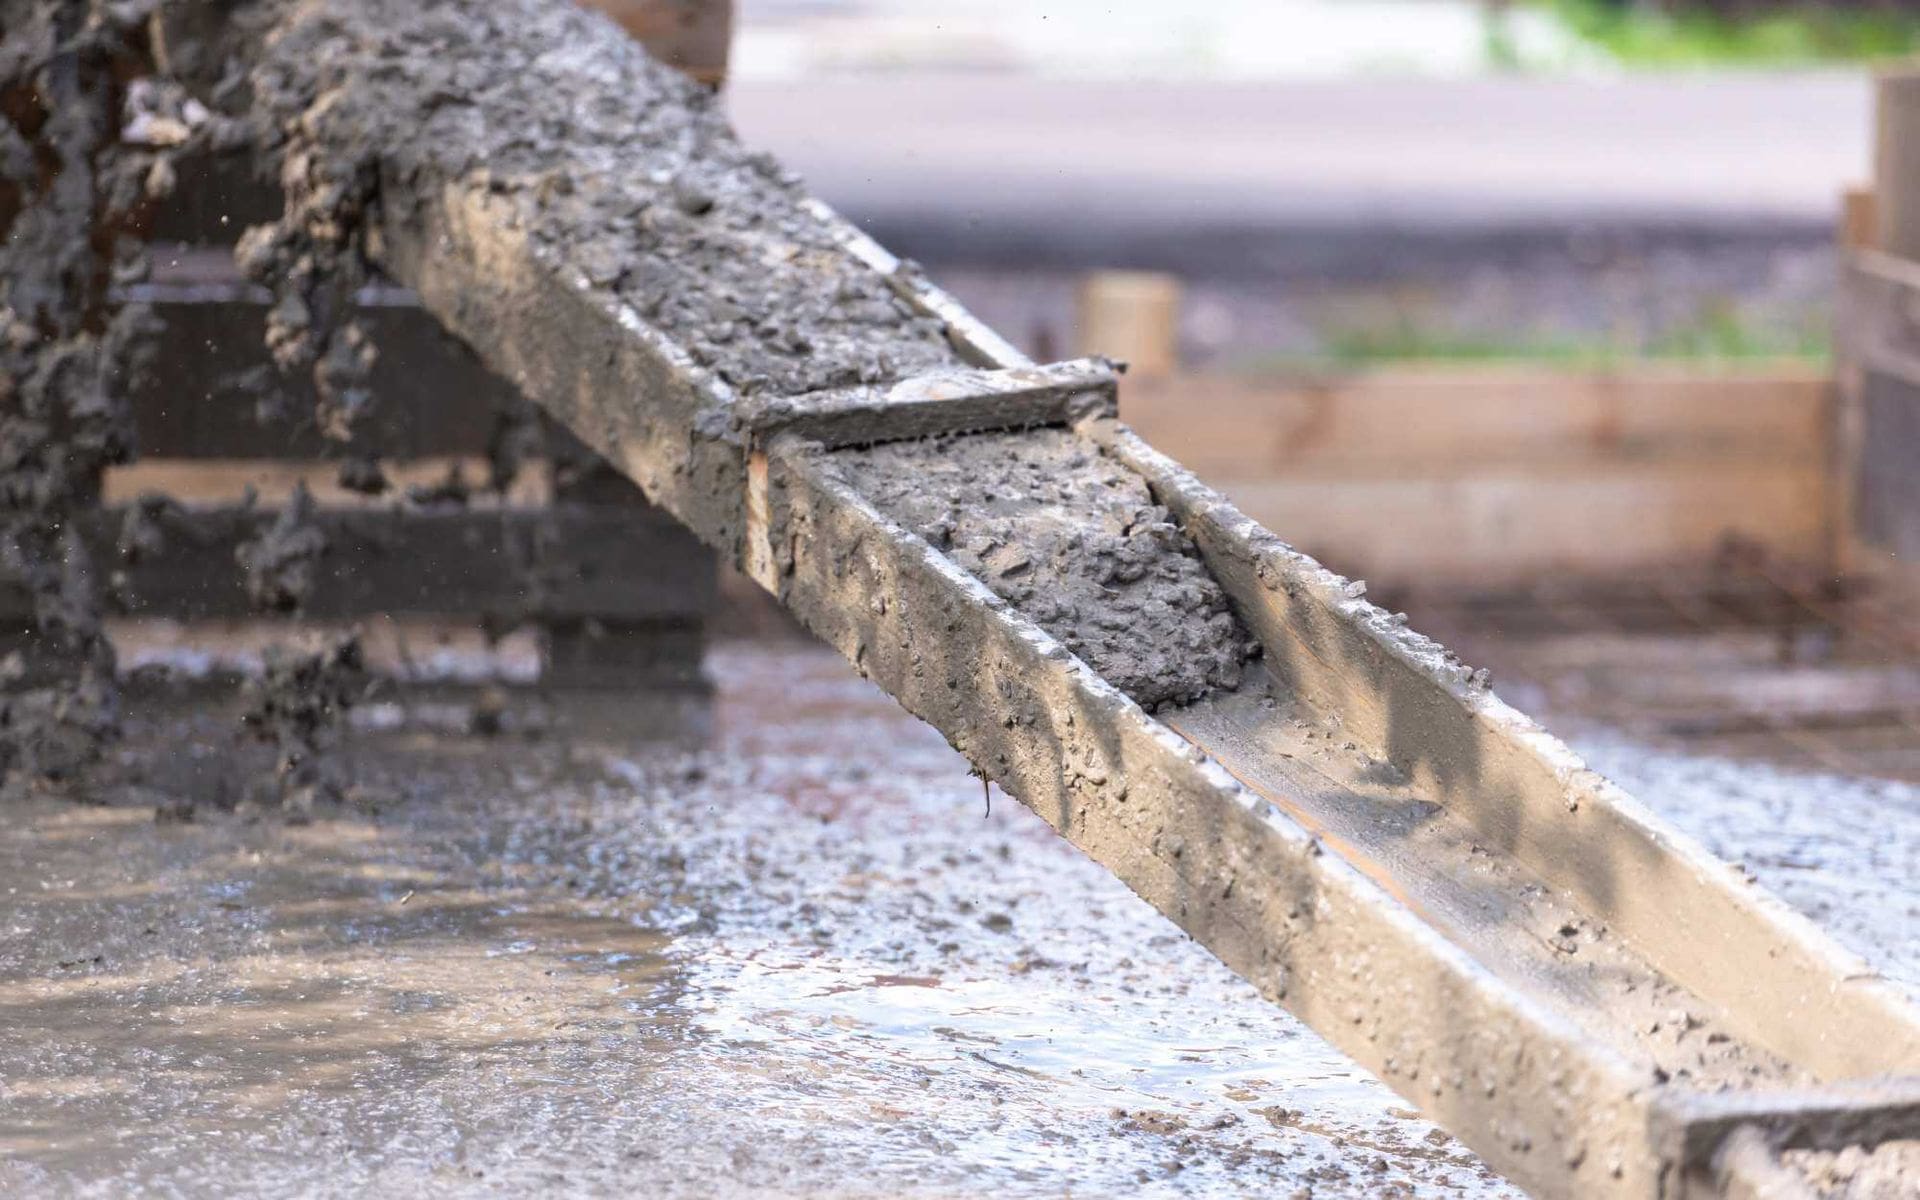 A close-up view of wet concrete being poured down a metal chute at a West Valley Concrete construction site. The surrounding area is blurred with a mix of water and concrete on the ground, indicating active construction work. Contact us today for a free quote to meet all your concrete needs.